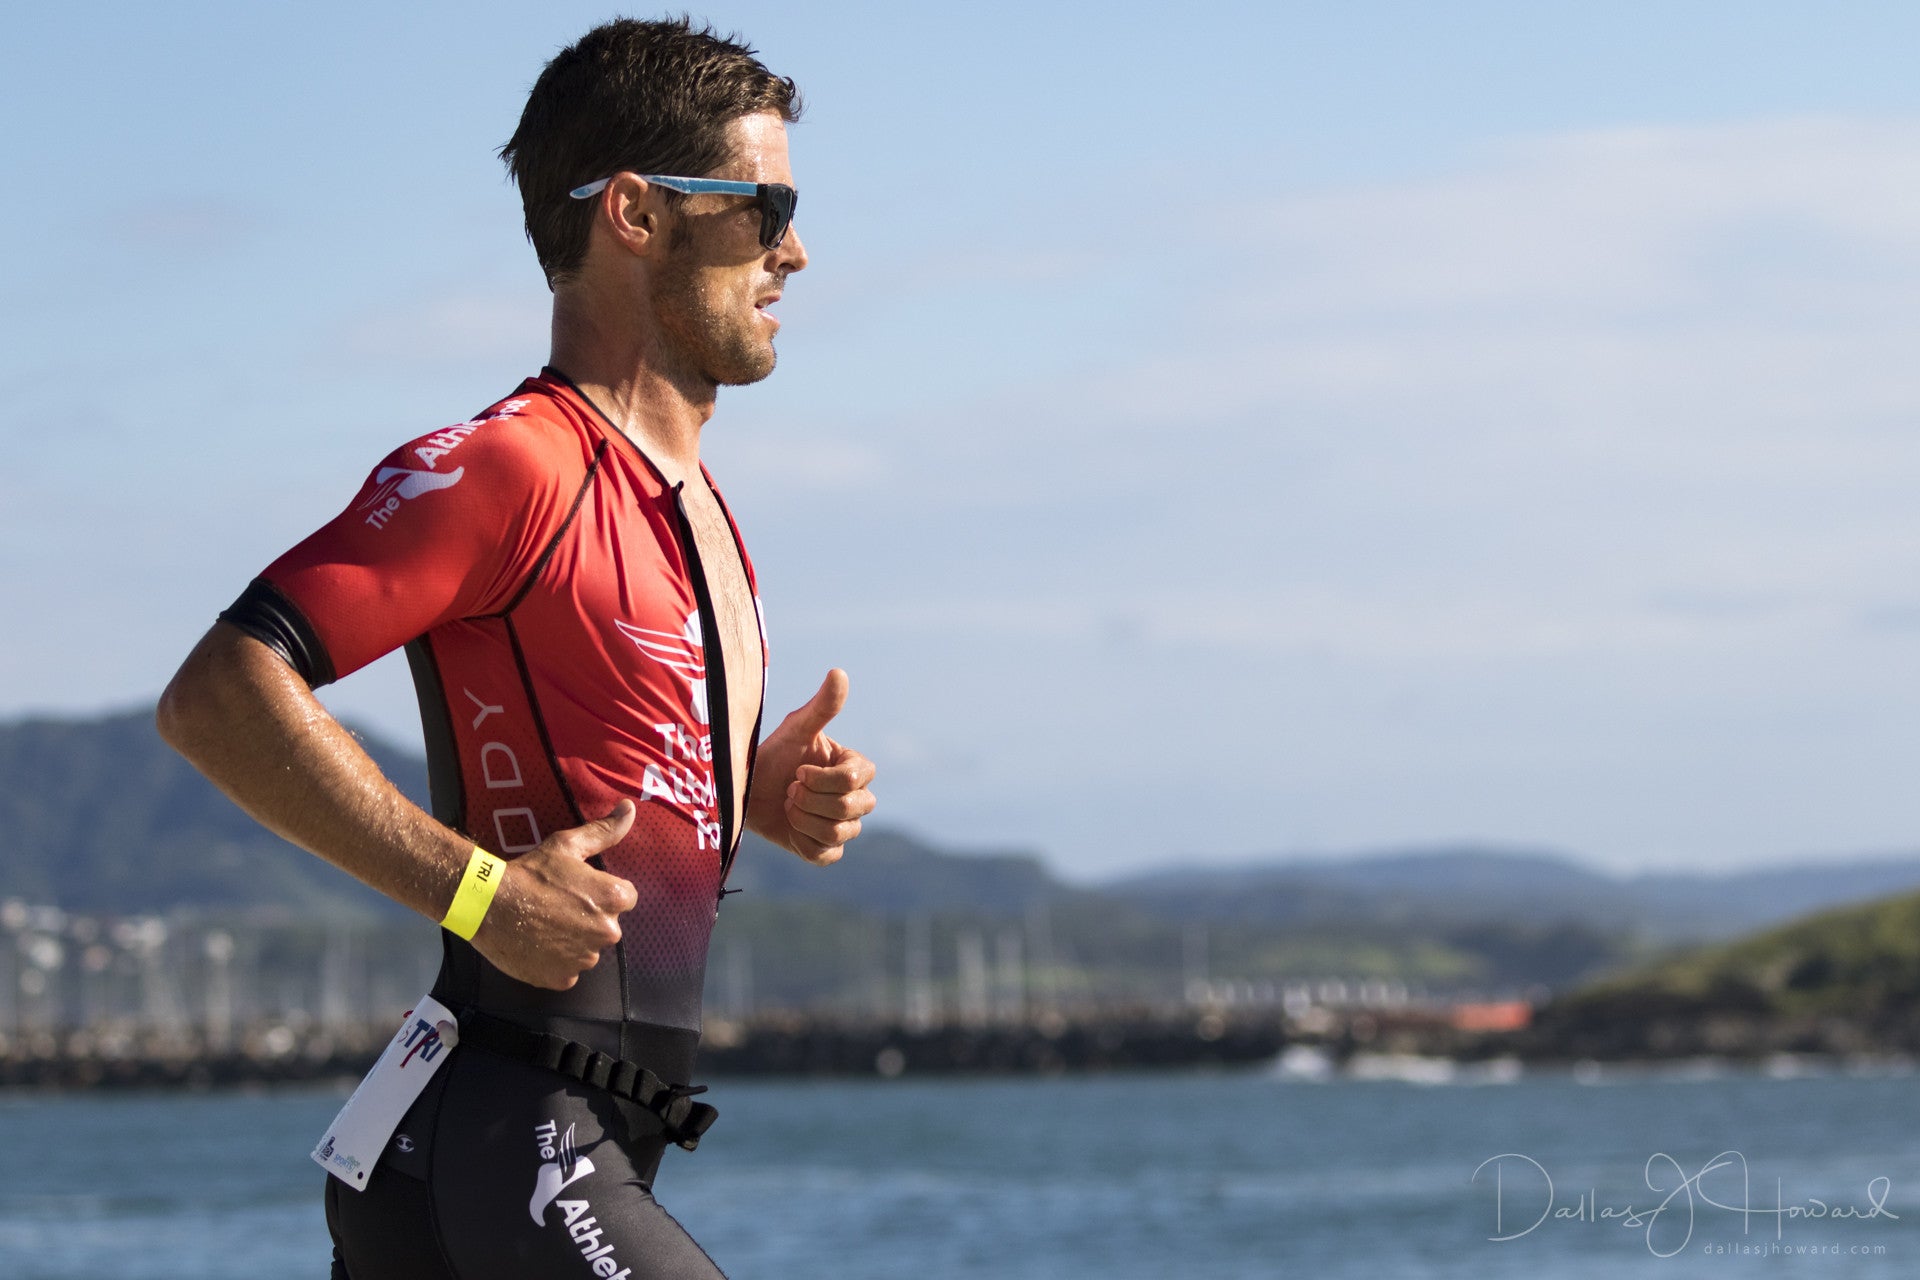 Welcome to the Parcours team Dan Stein - pro triathlete